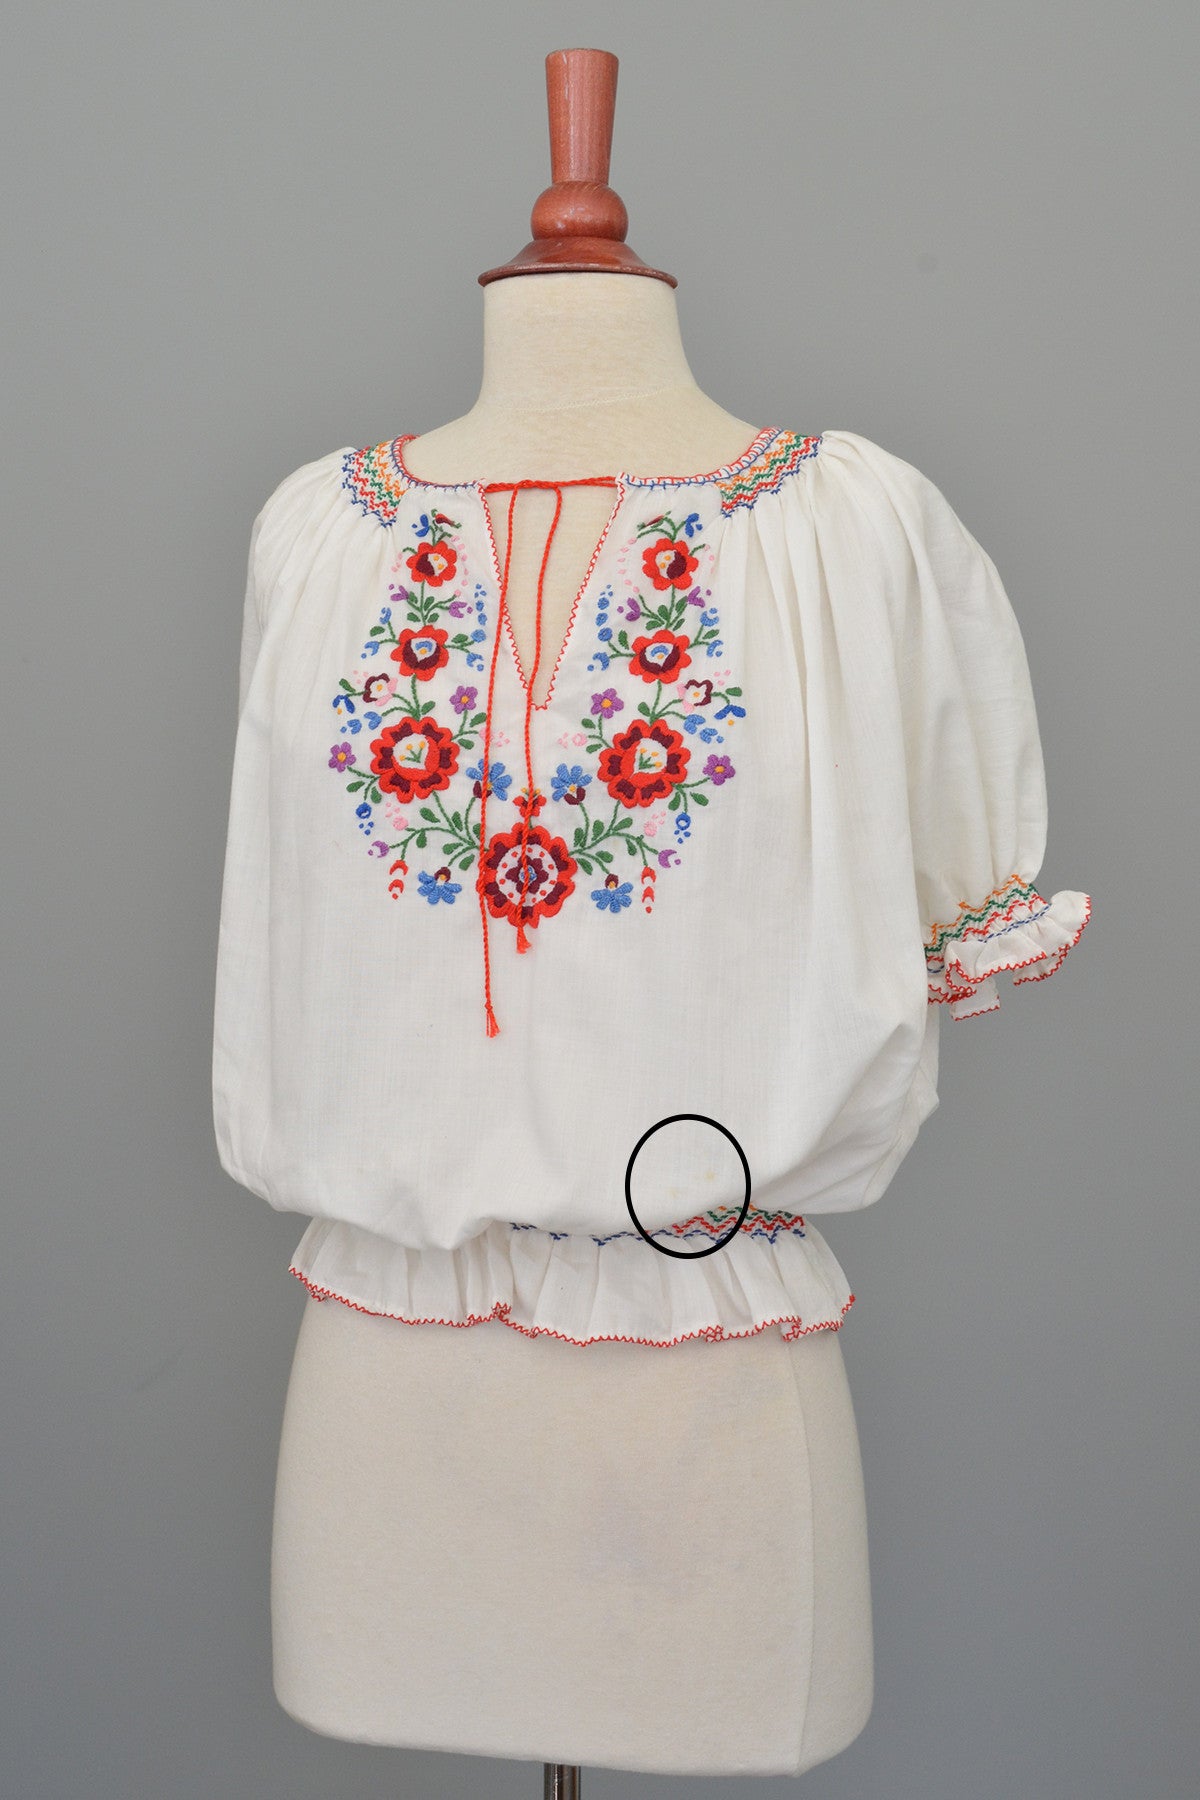 Embroidered Red Blue Flowers Vintage Peasant Top